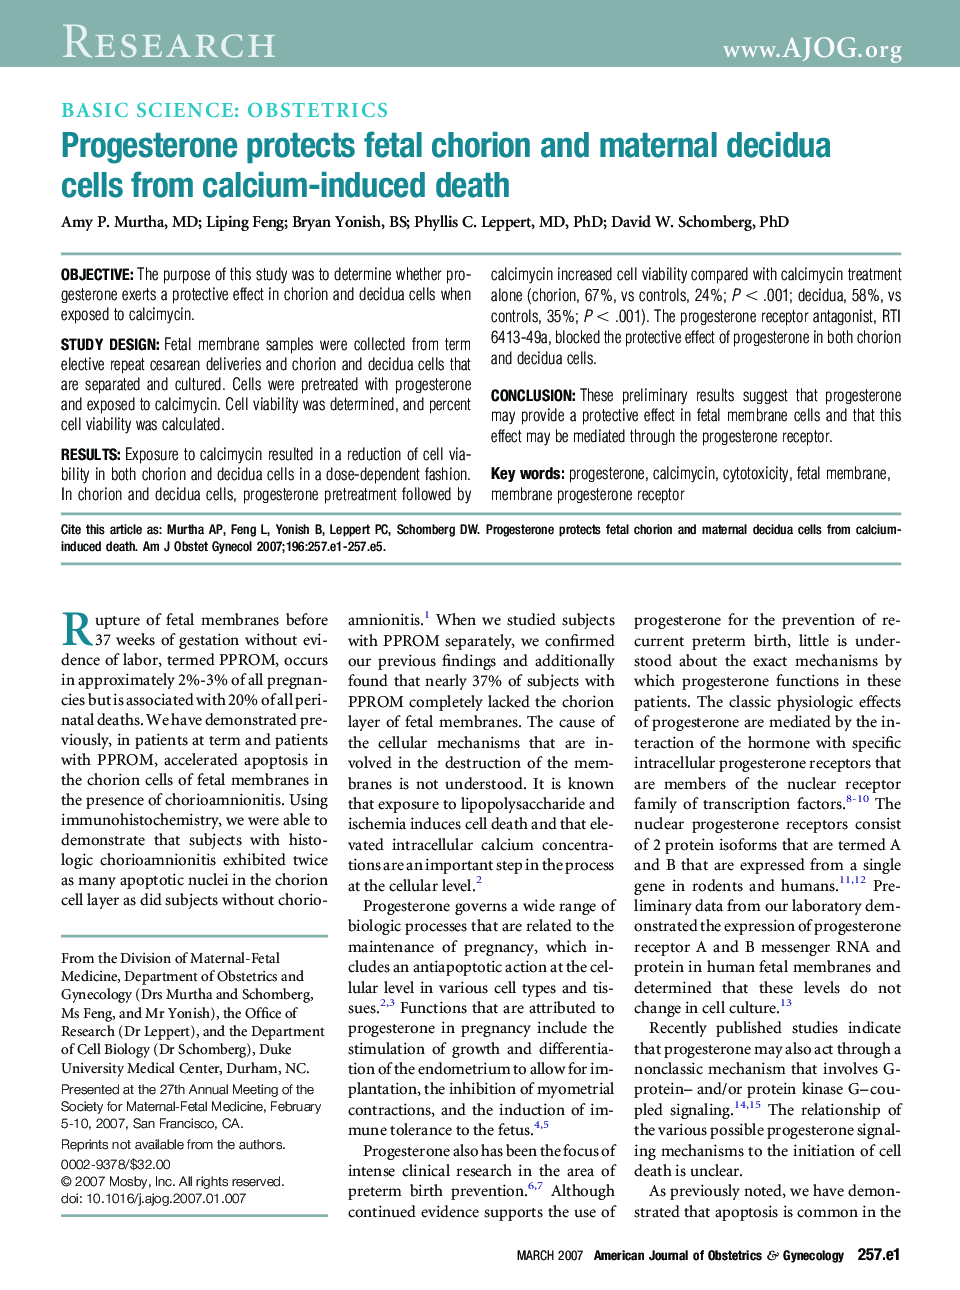 Progesterone protects fetal chorion and maternal decidua cells from calcium-induced death